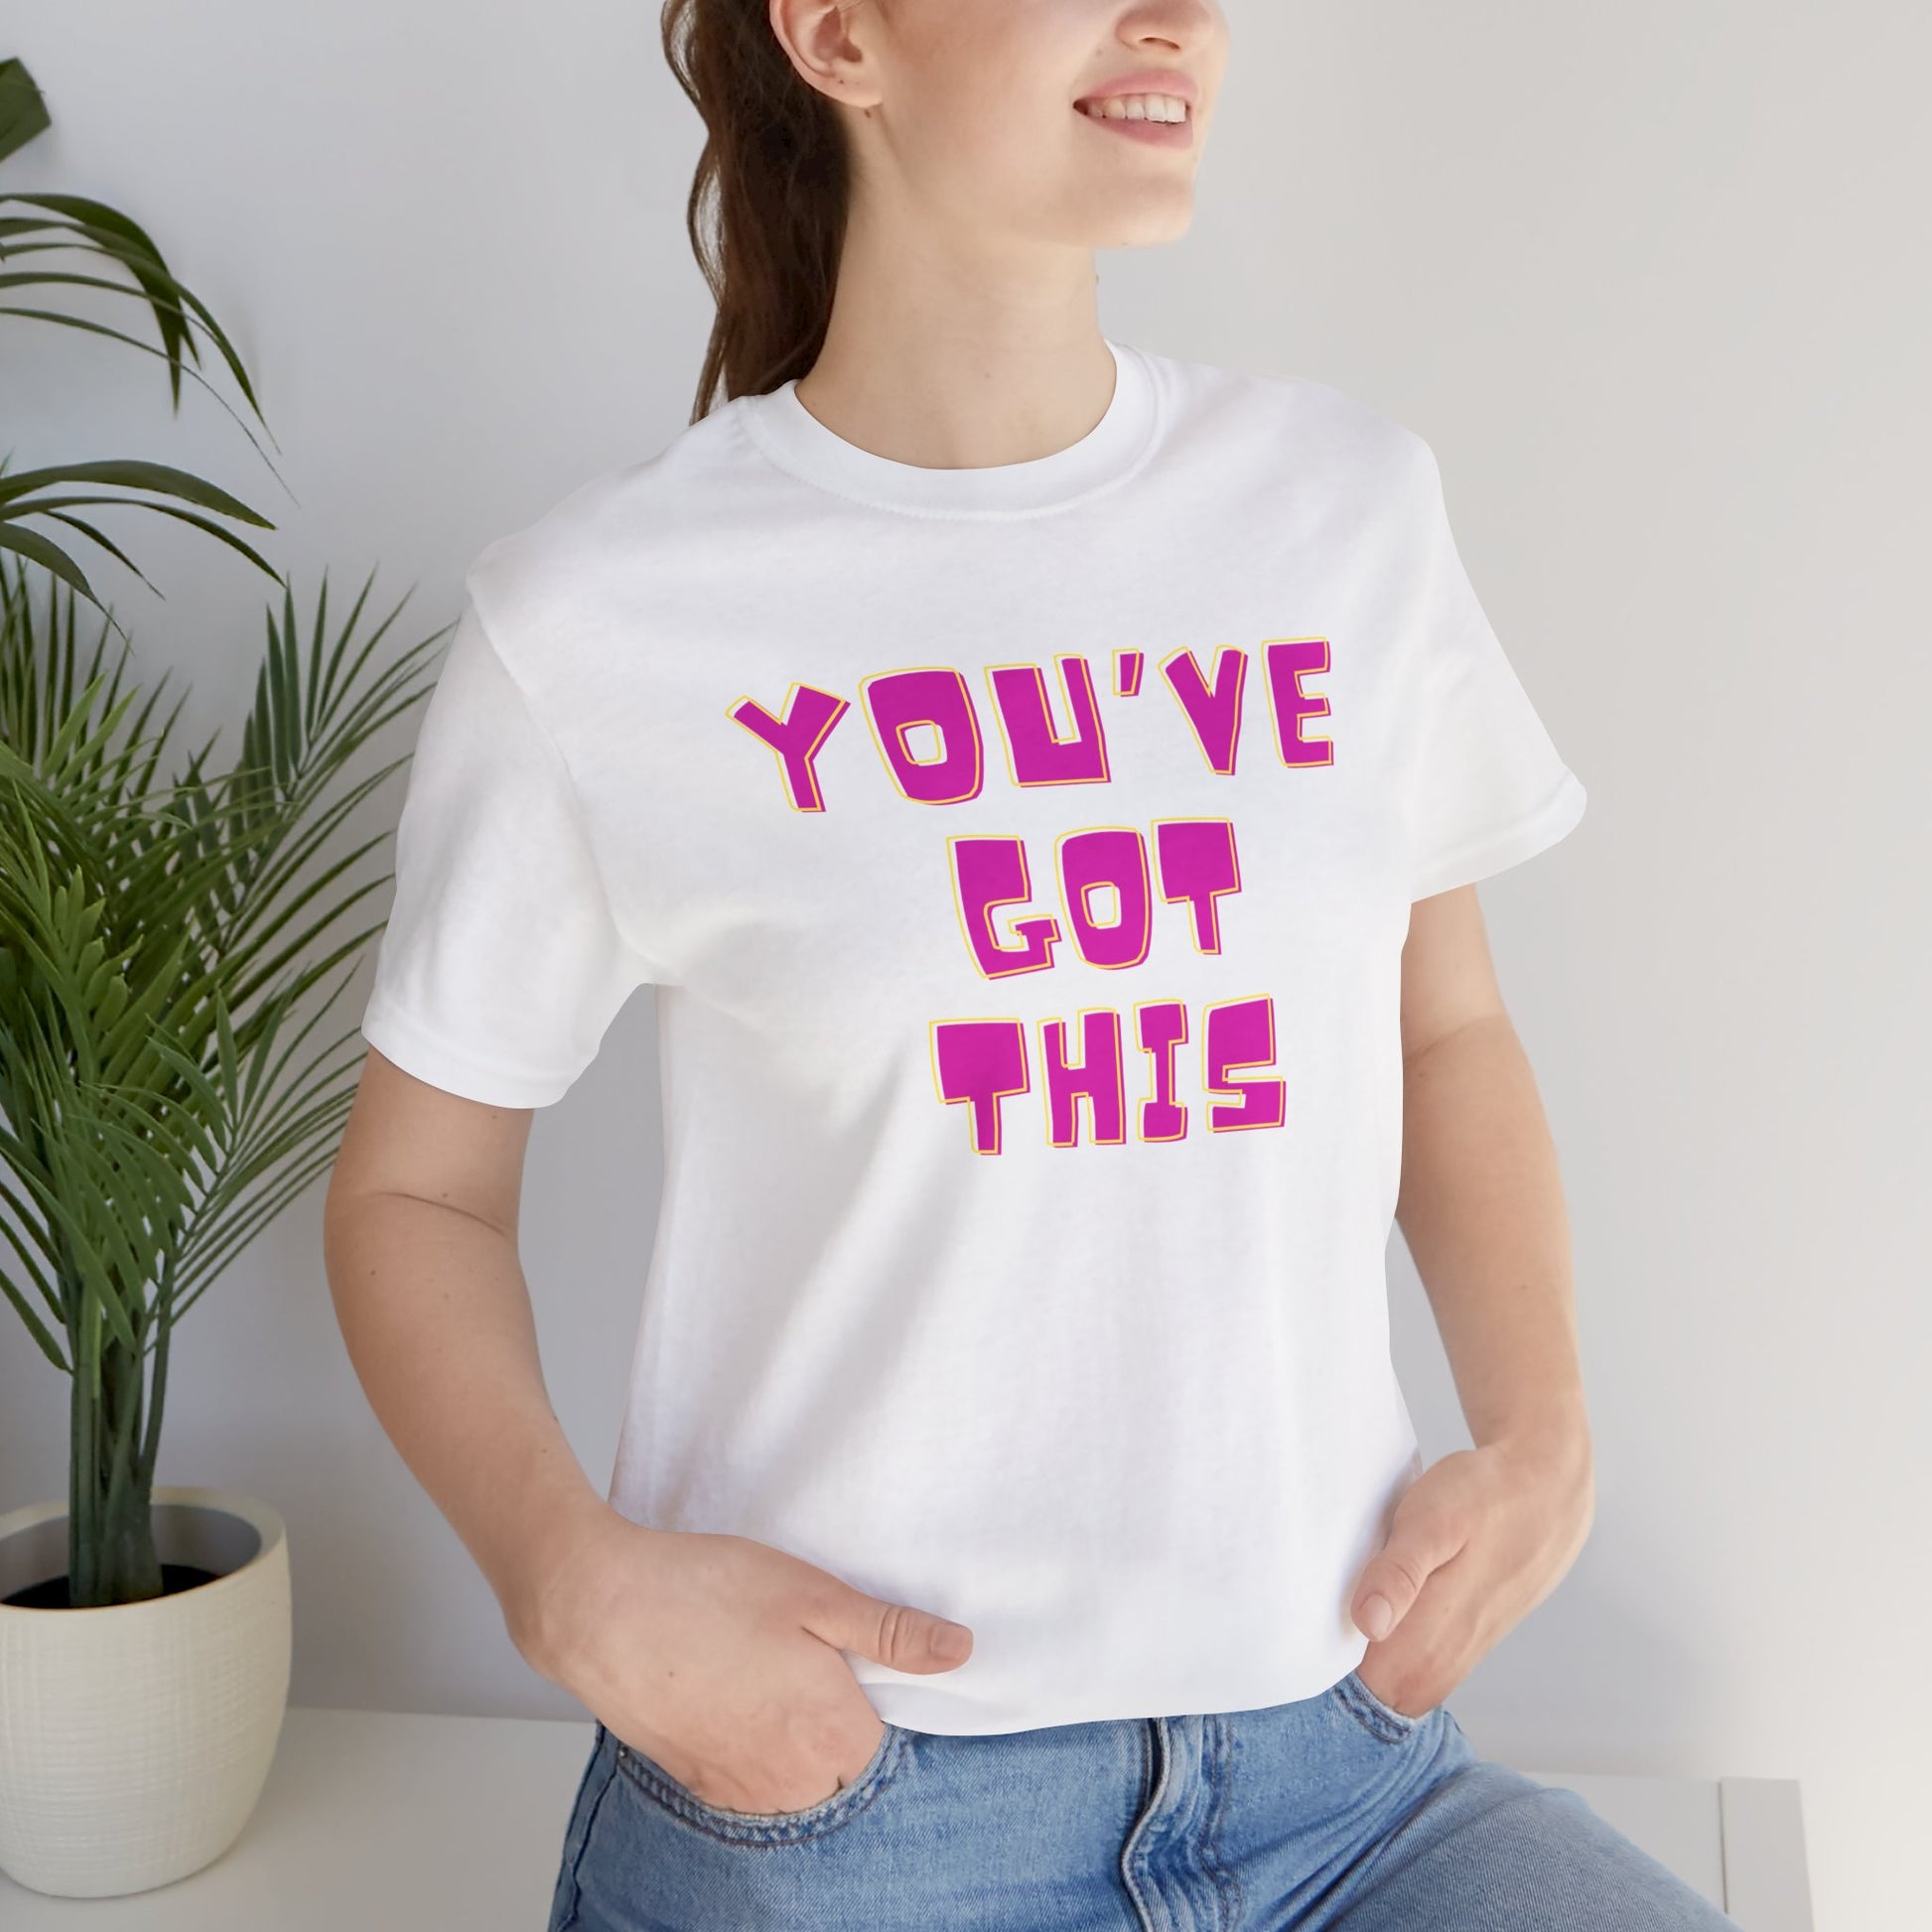 You've Got This - Soft Cotton Adult Unisex T-Shirt, Gift for friends and family, Gift for friends and family by clothezy.com - Buy Now